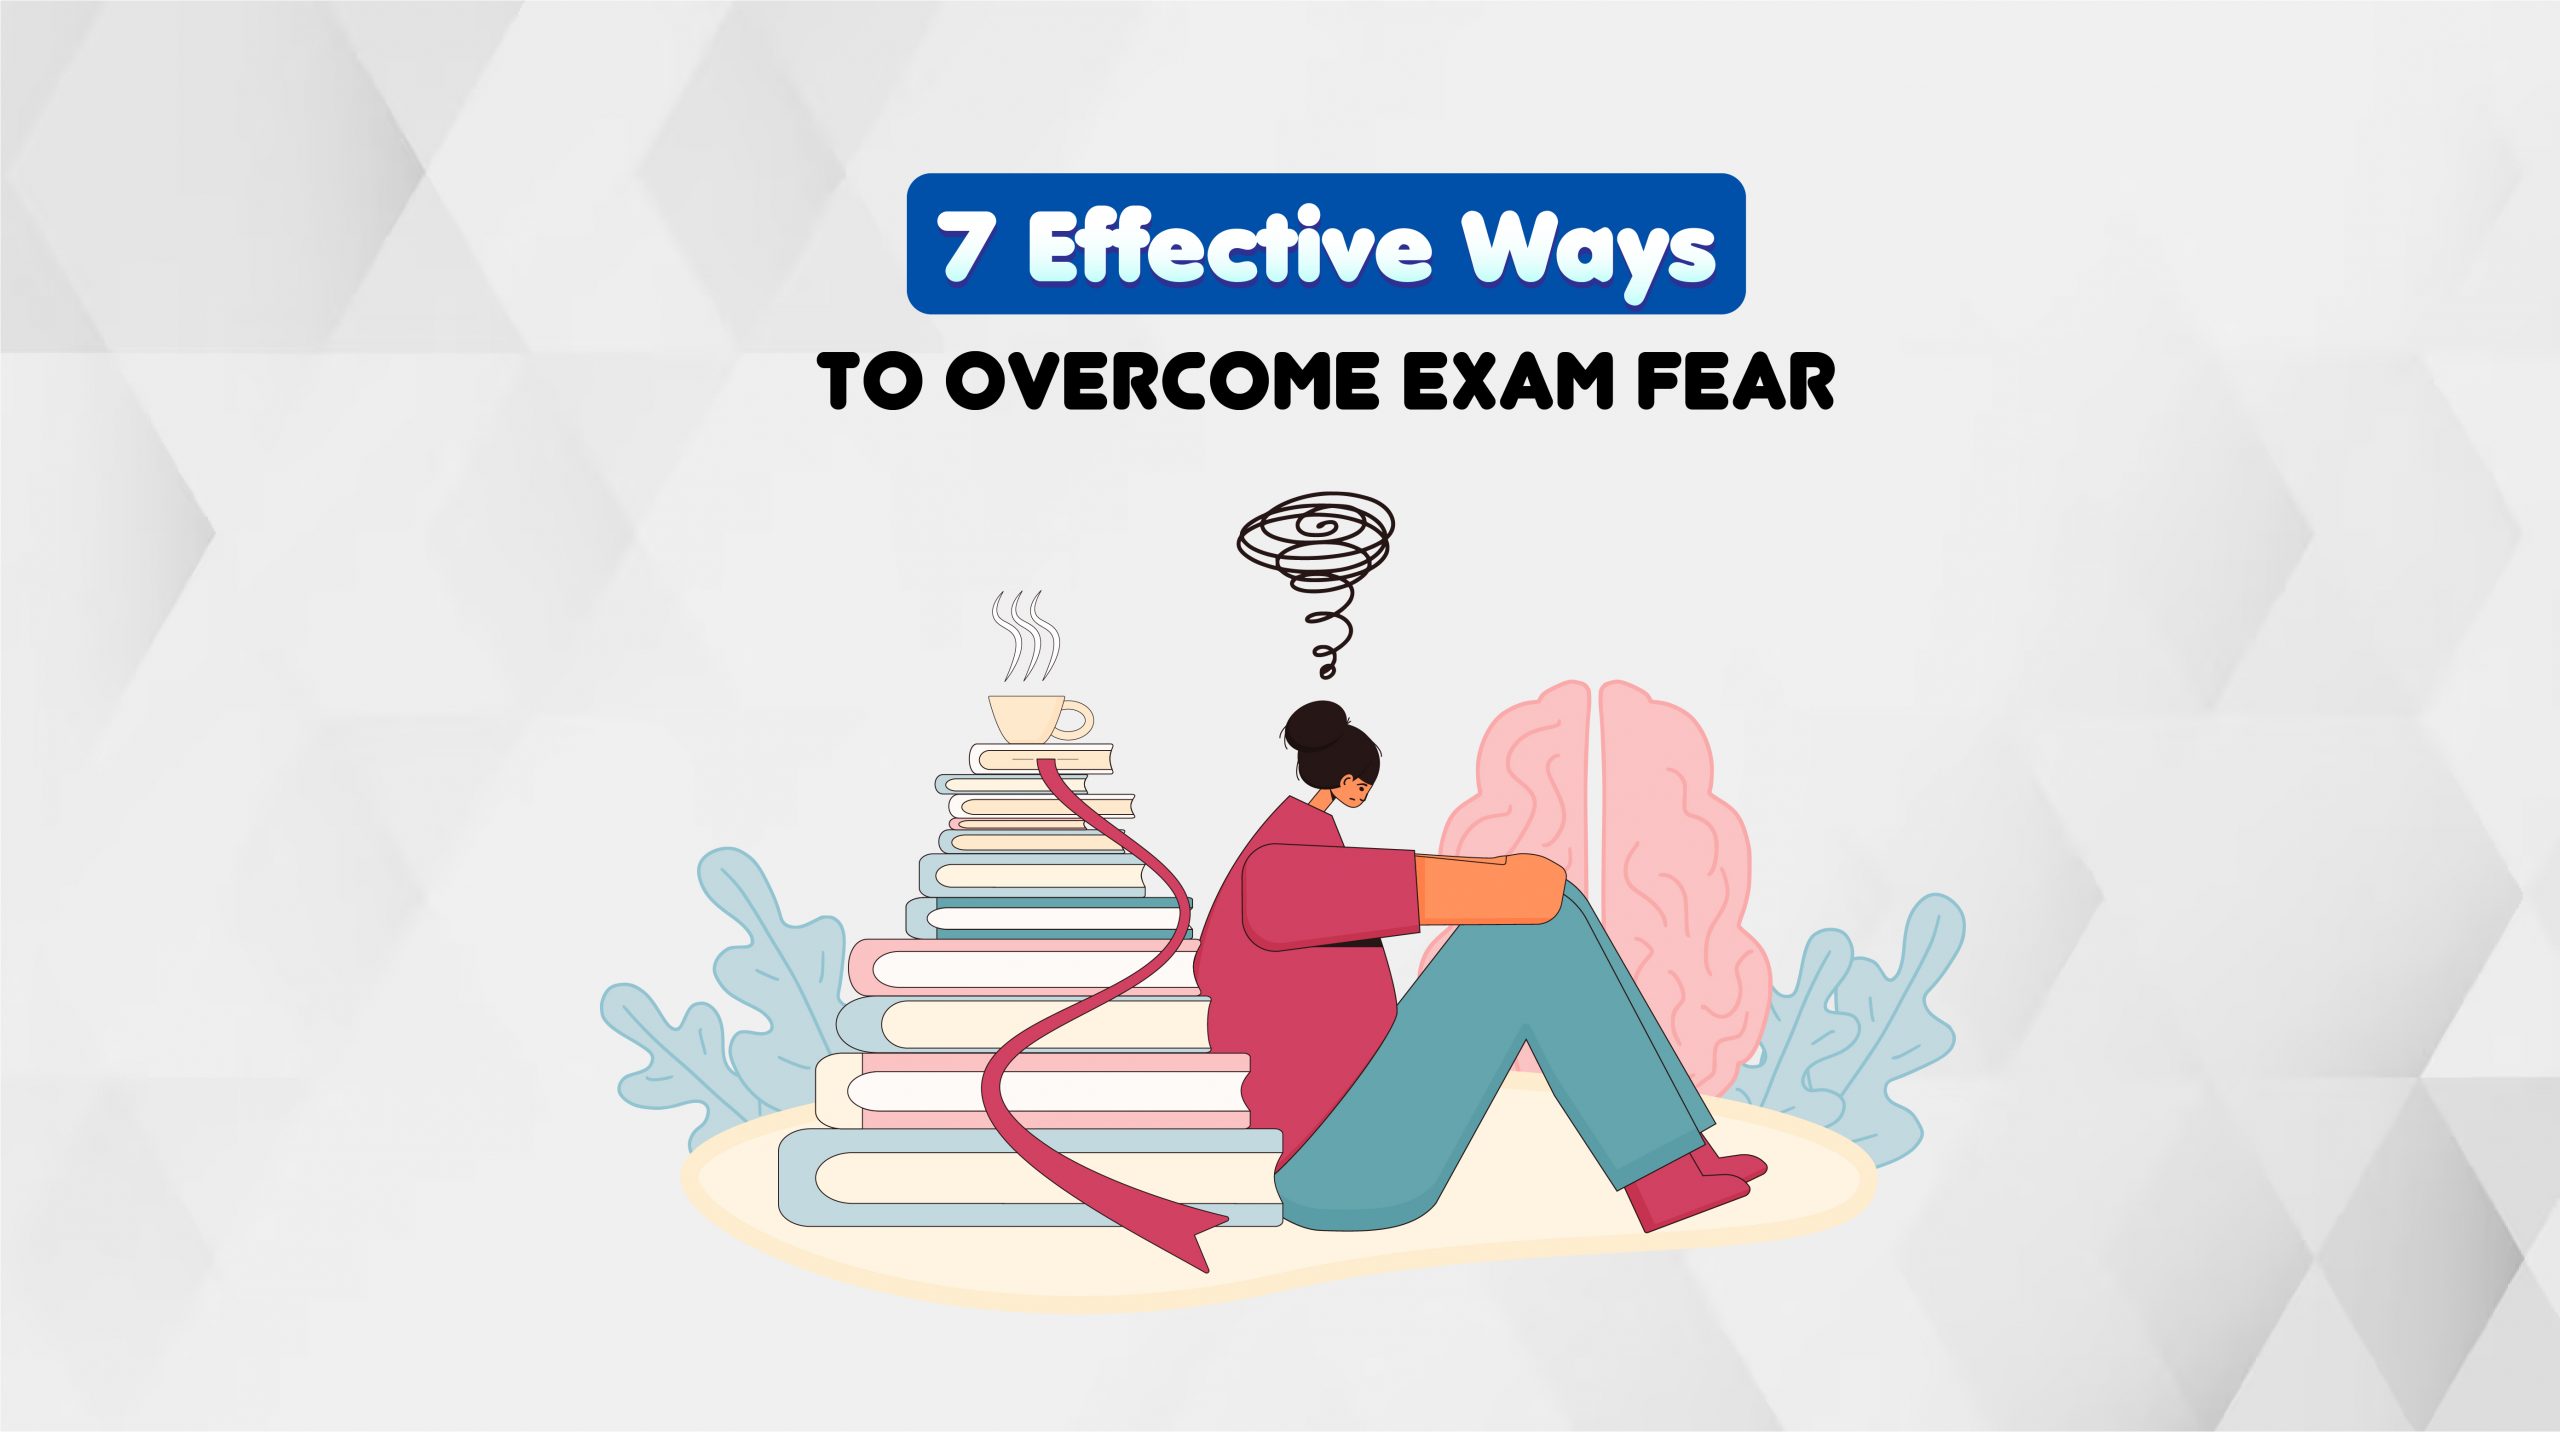 7 Effective Ways to Overcome Exam Fear